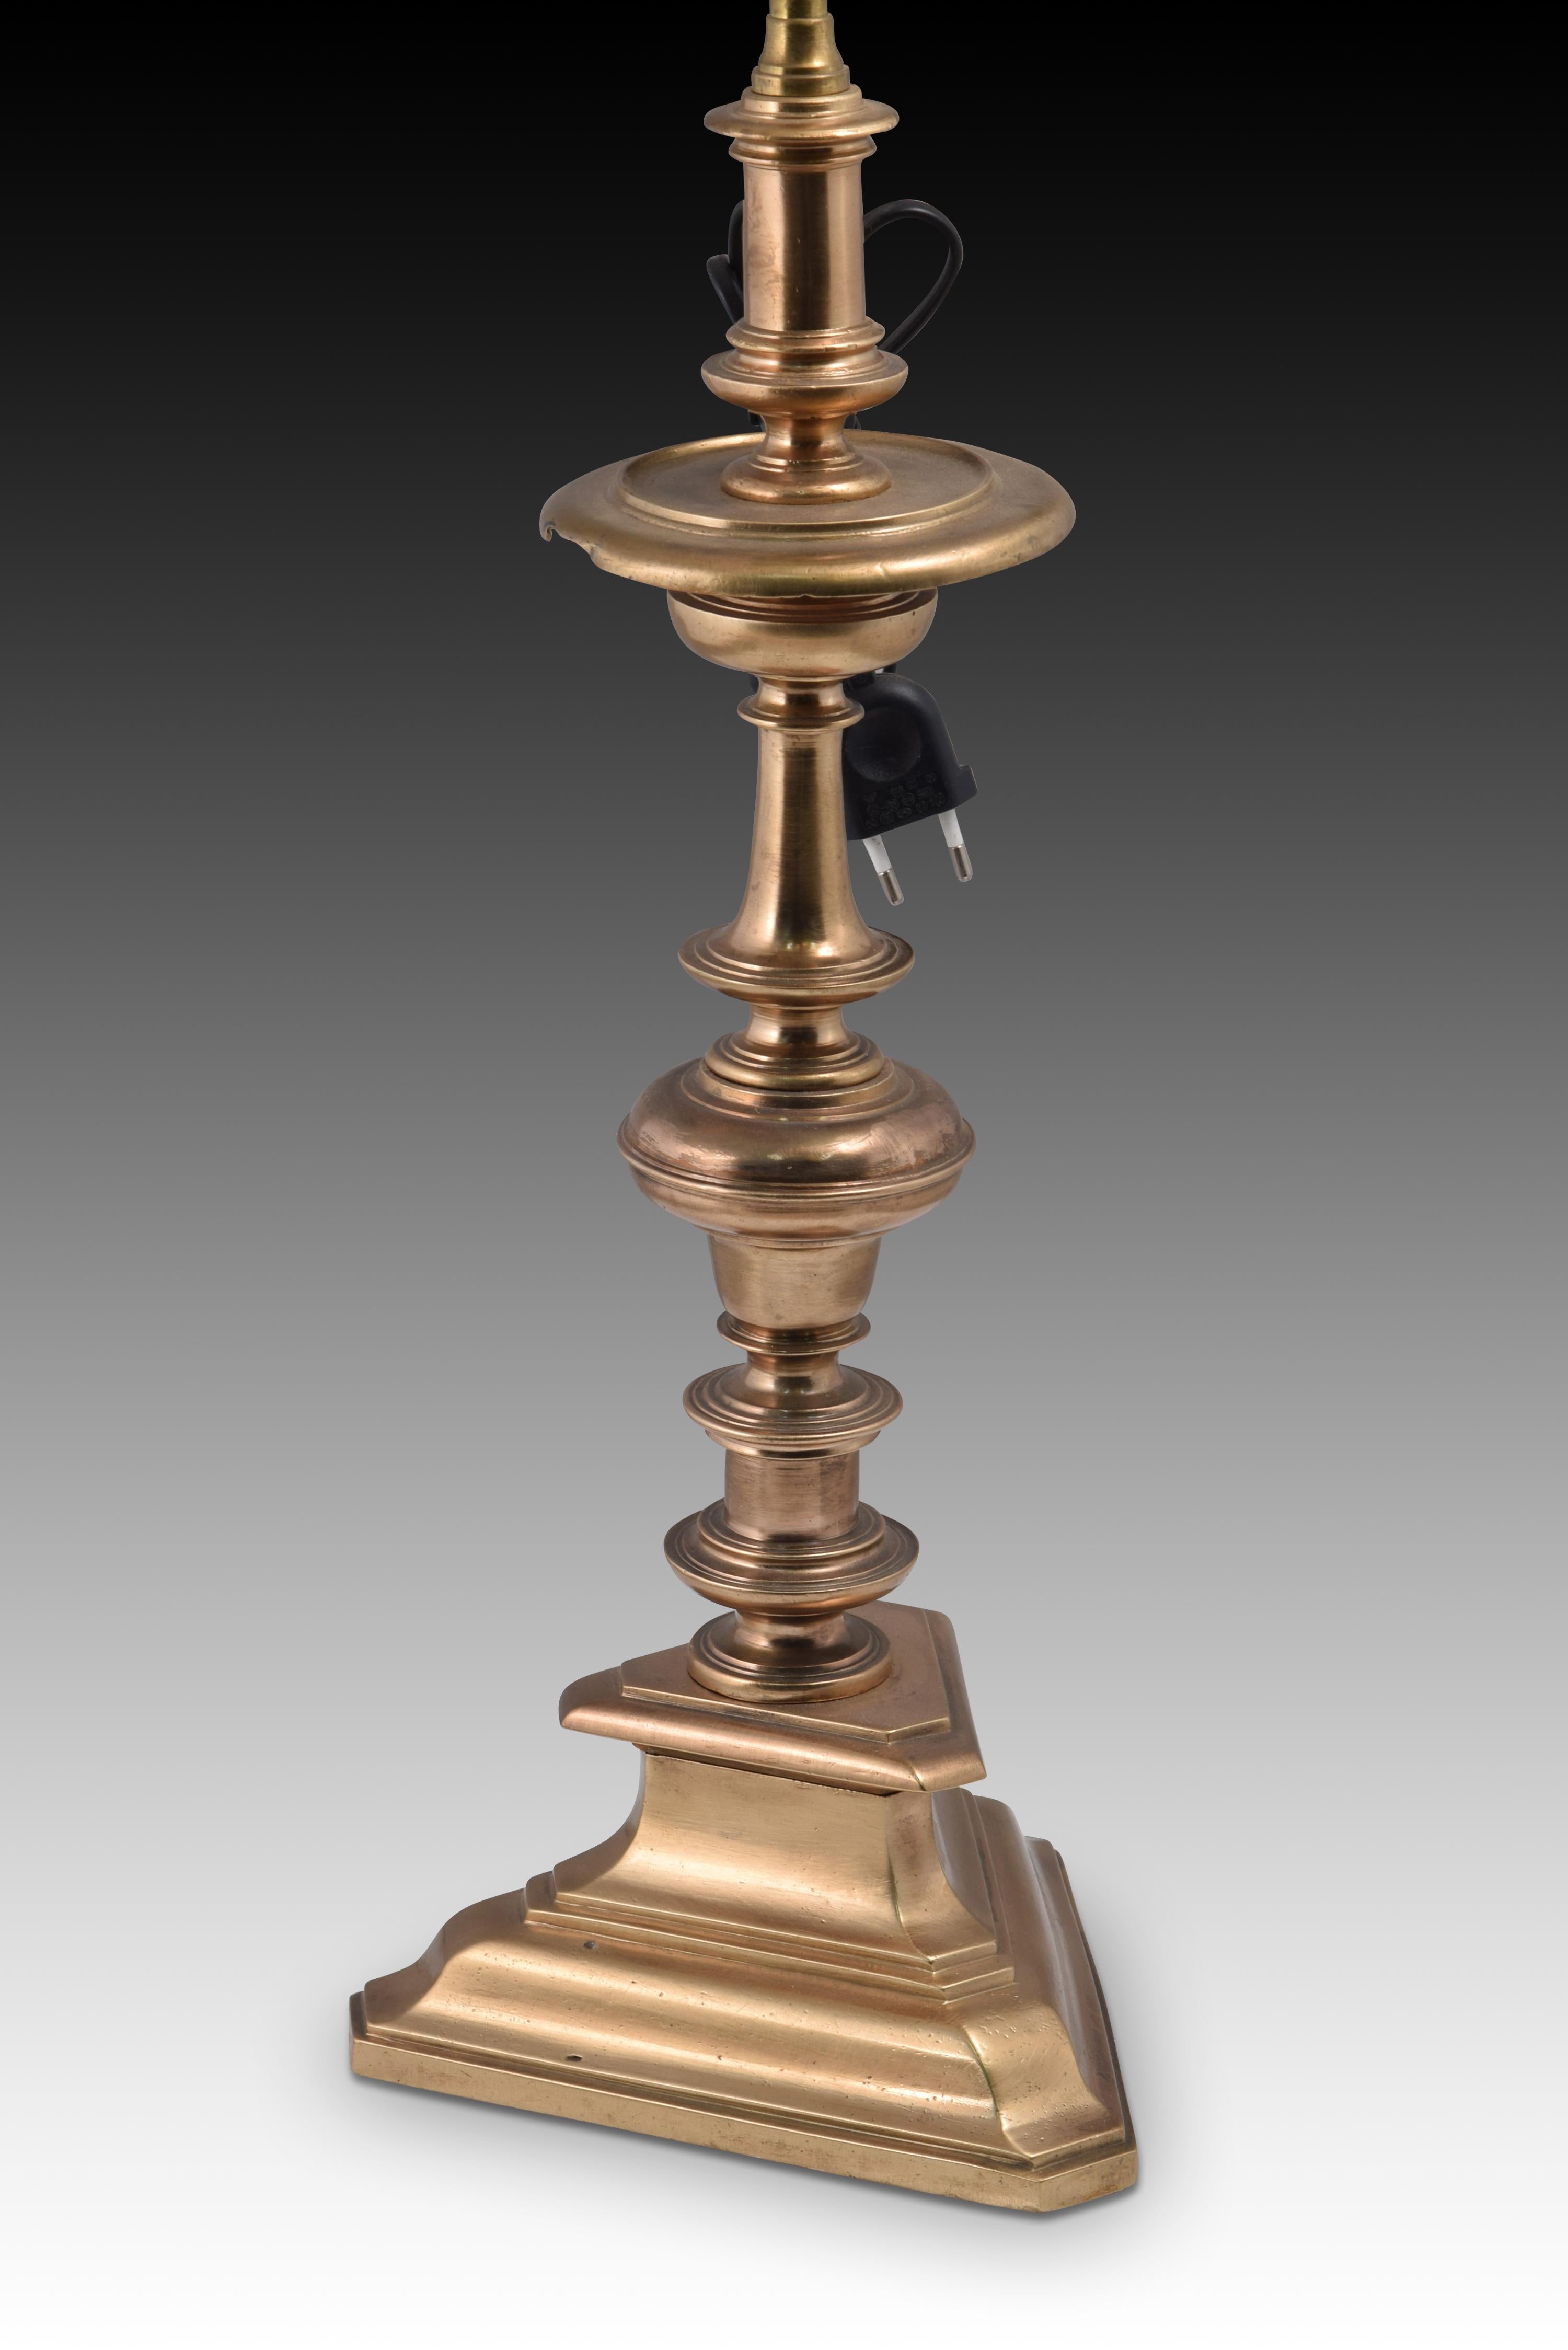 Pair of Dutch style candlesticks. S. XVIII
Bronze. Electrified like lamps.
Pair of Dutch-style candlesticks converted into lamp bases.
They have a turned structure, typical of the refined Baroque.
Size: 55 x 55 x 79 cms.
International Buyers –